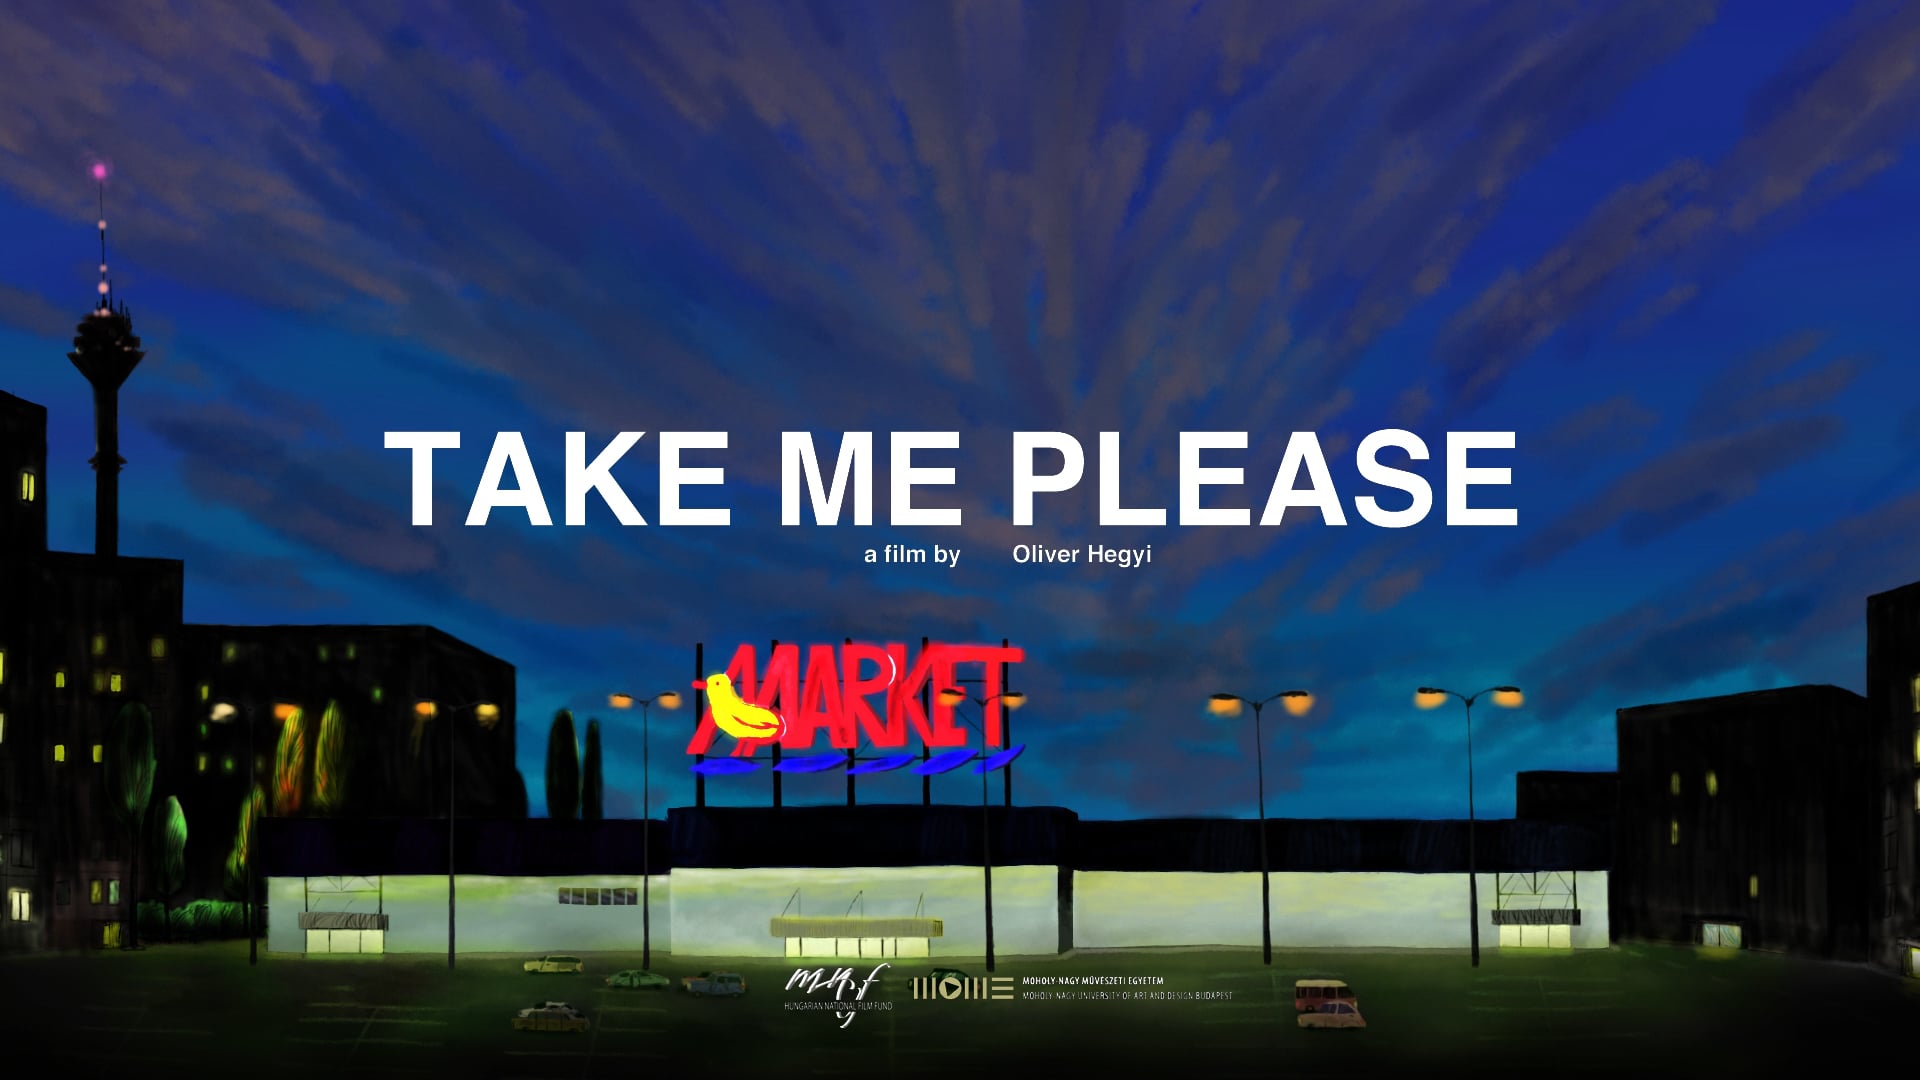 Take Me Please - Electronic Signage , HD Wallpaper & Backgrounds